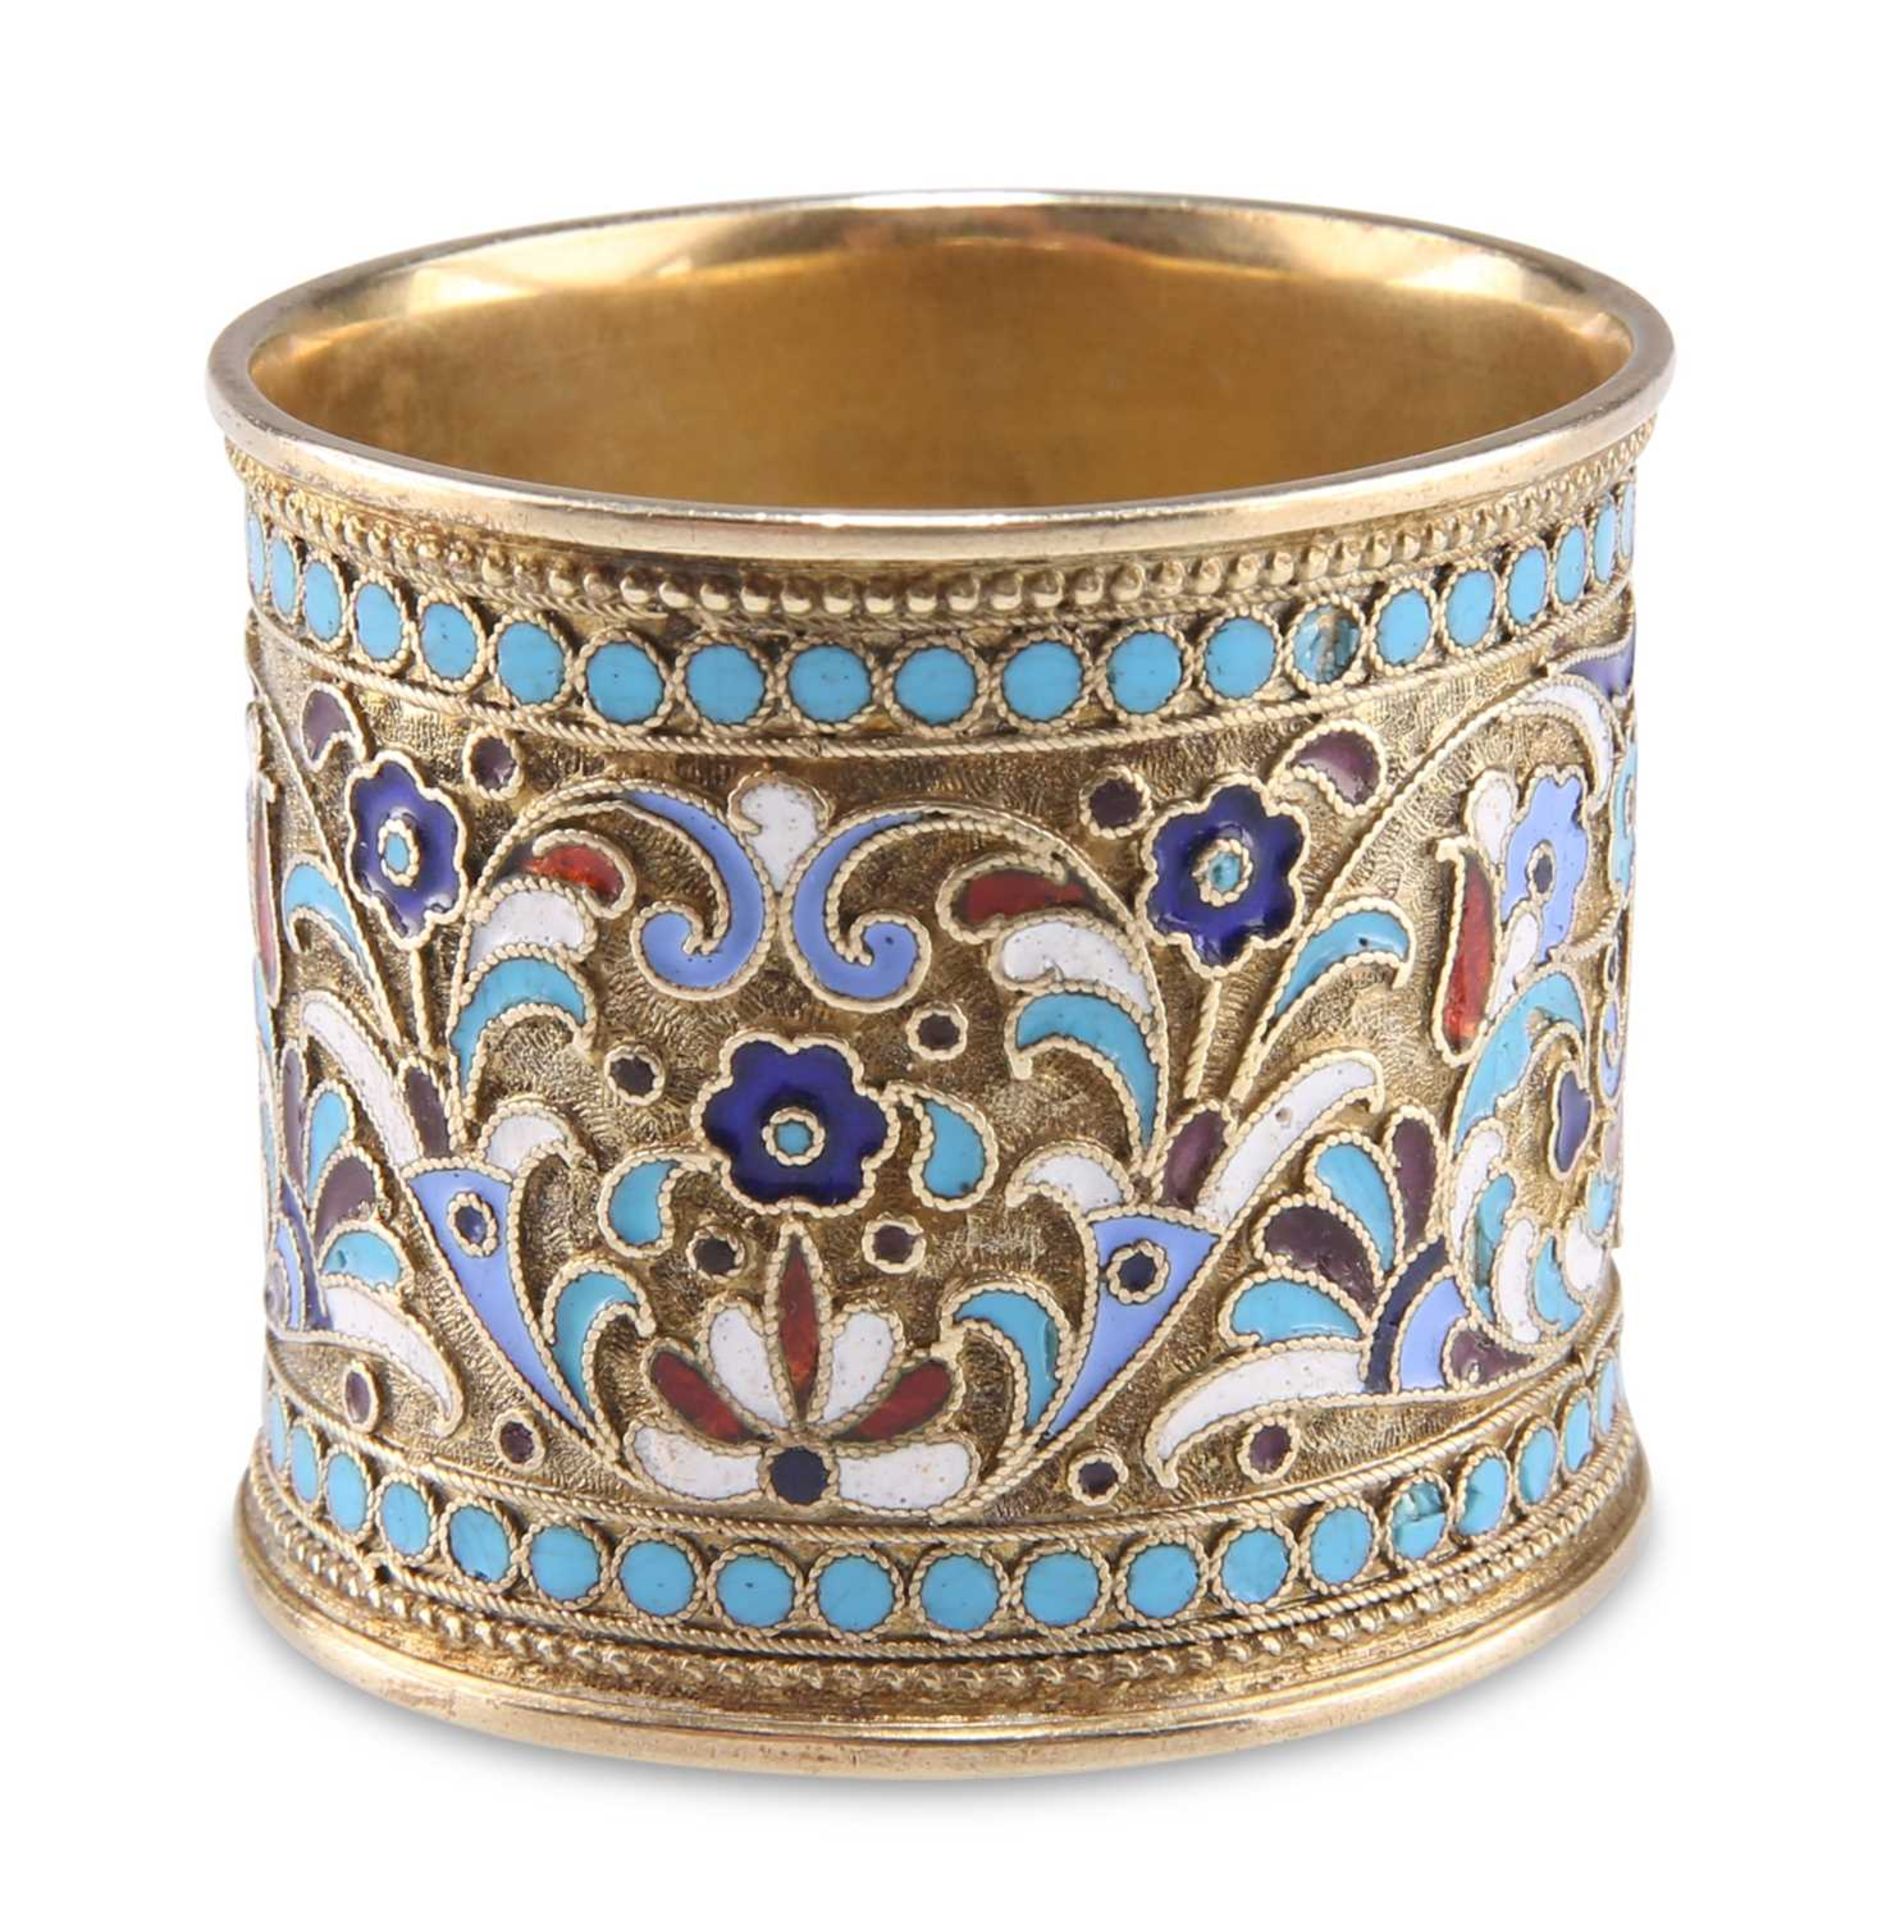 A RUSSIAN SILVER AND CHAMPLEVÉ ENAMEL NAPKIN RING